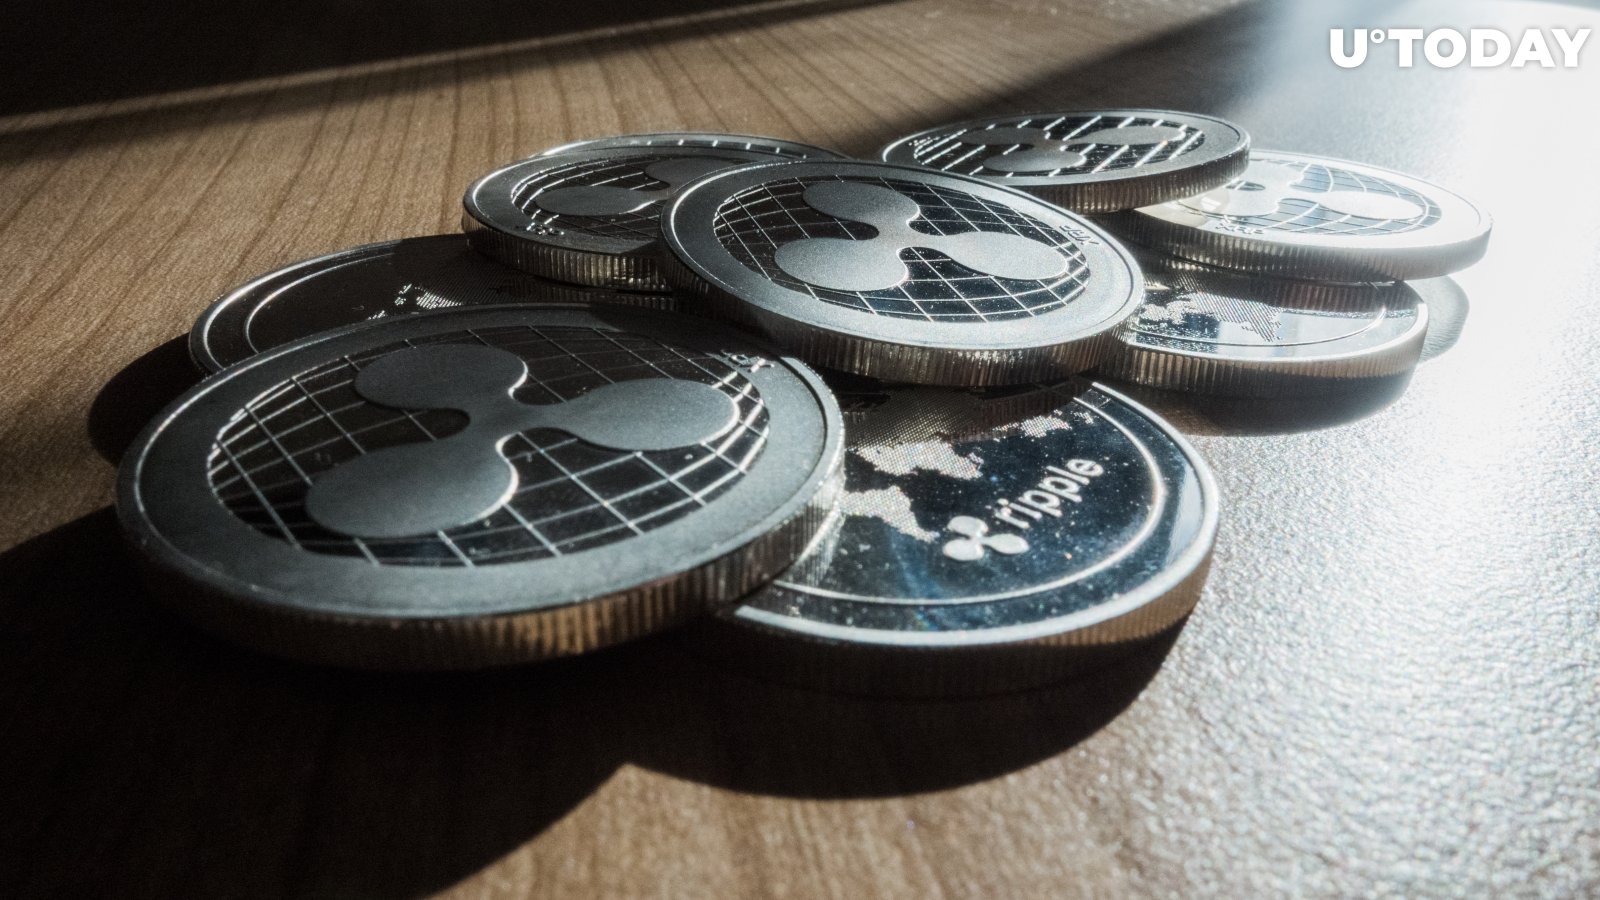  127.3 Million XRP Shifted by Exchanges, While XRP Address Activity Goes Way Up